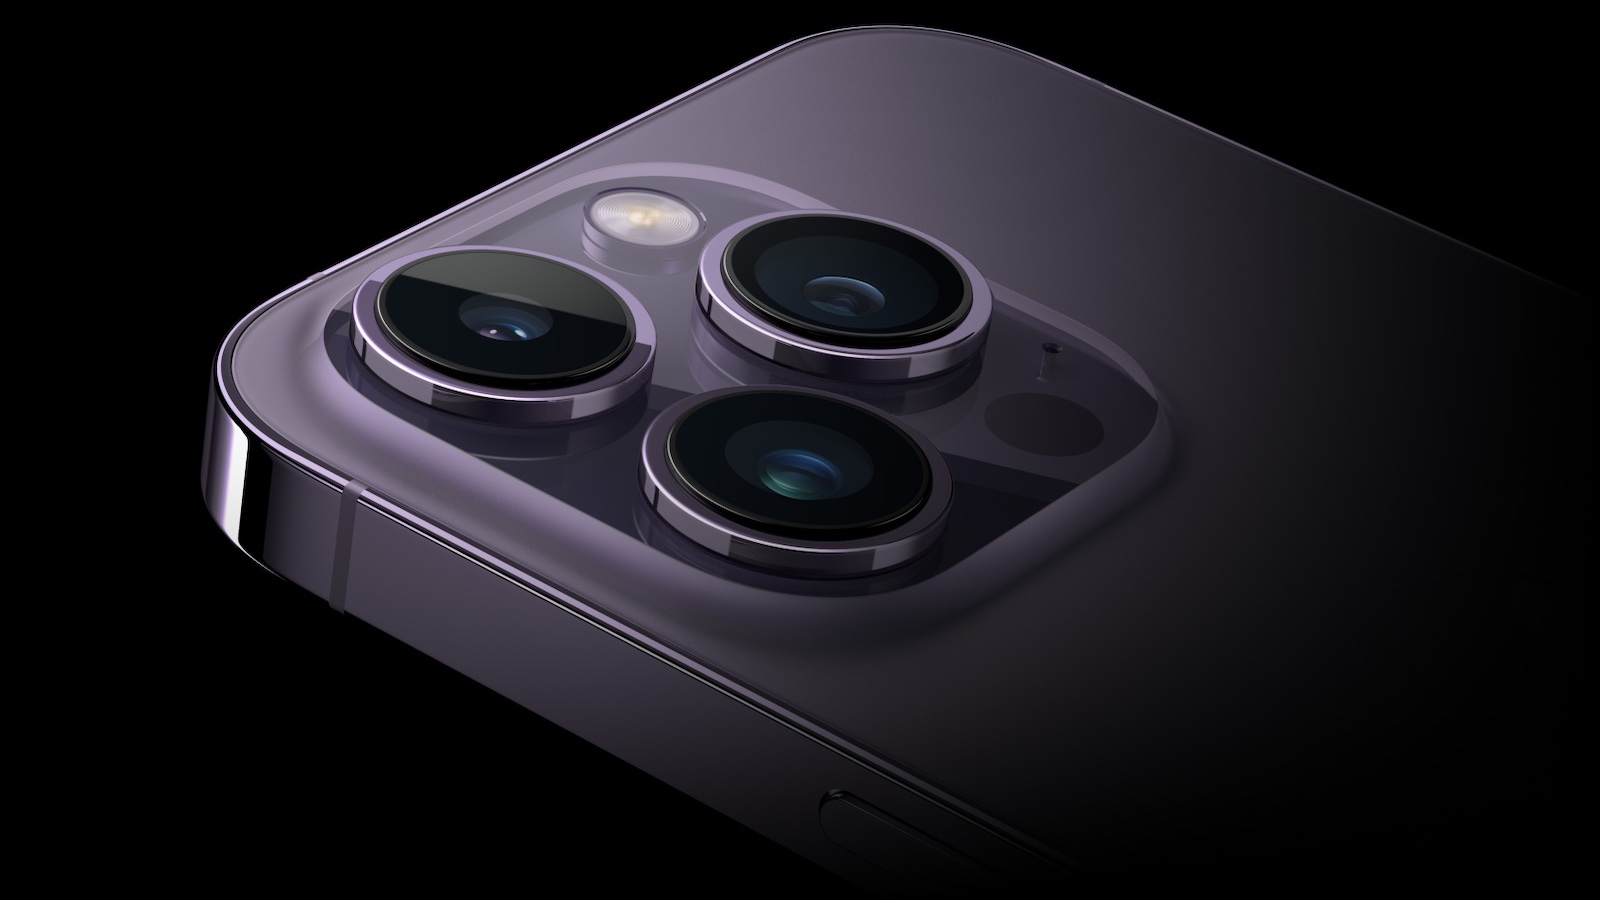 4K ProRes Video Recording on iPhone 14 Pro Still Requires at Least 256GB Model